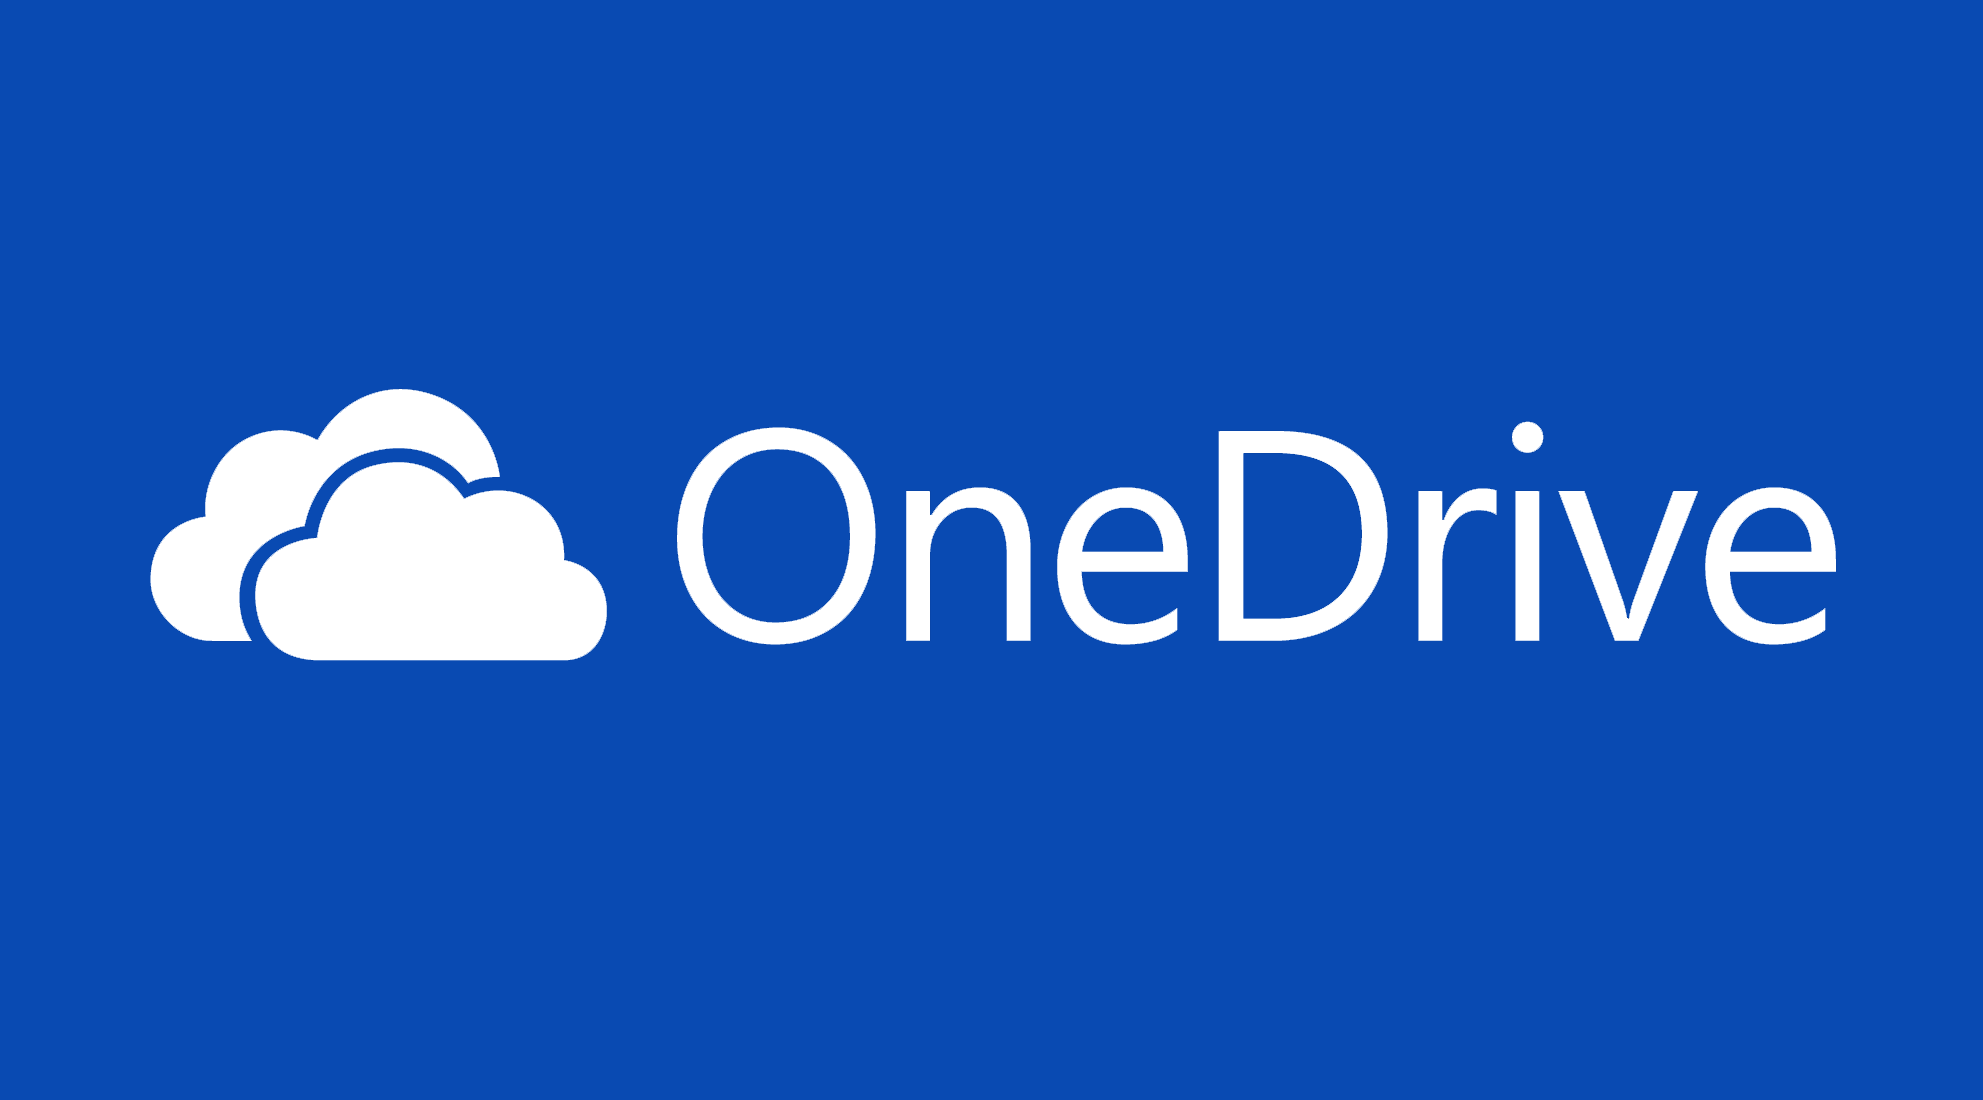 An Office 365 subscription now comes with unlimited OneDrive storage - ShinyShiny1983 x 1100